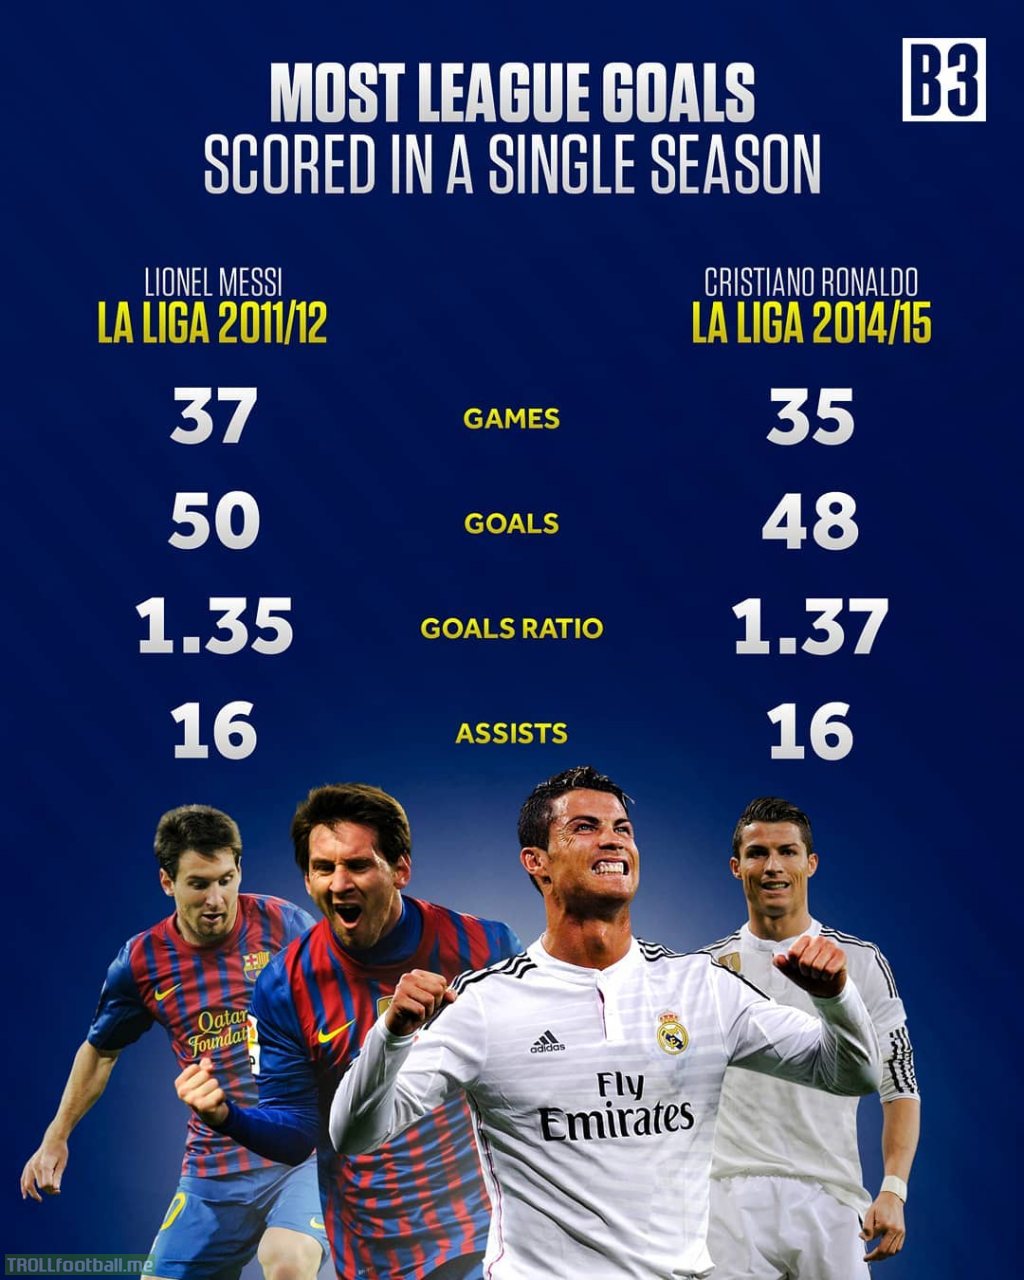 Messi 11/12 and Ronaldo 14/15 in la liga. Crazy to think neither of them won the league in those seasons